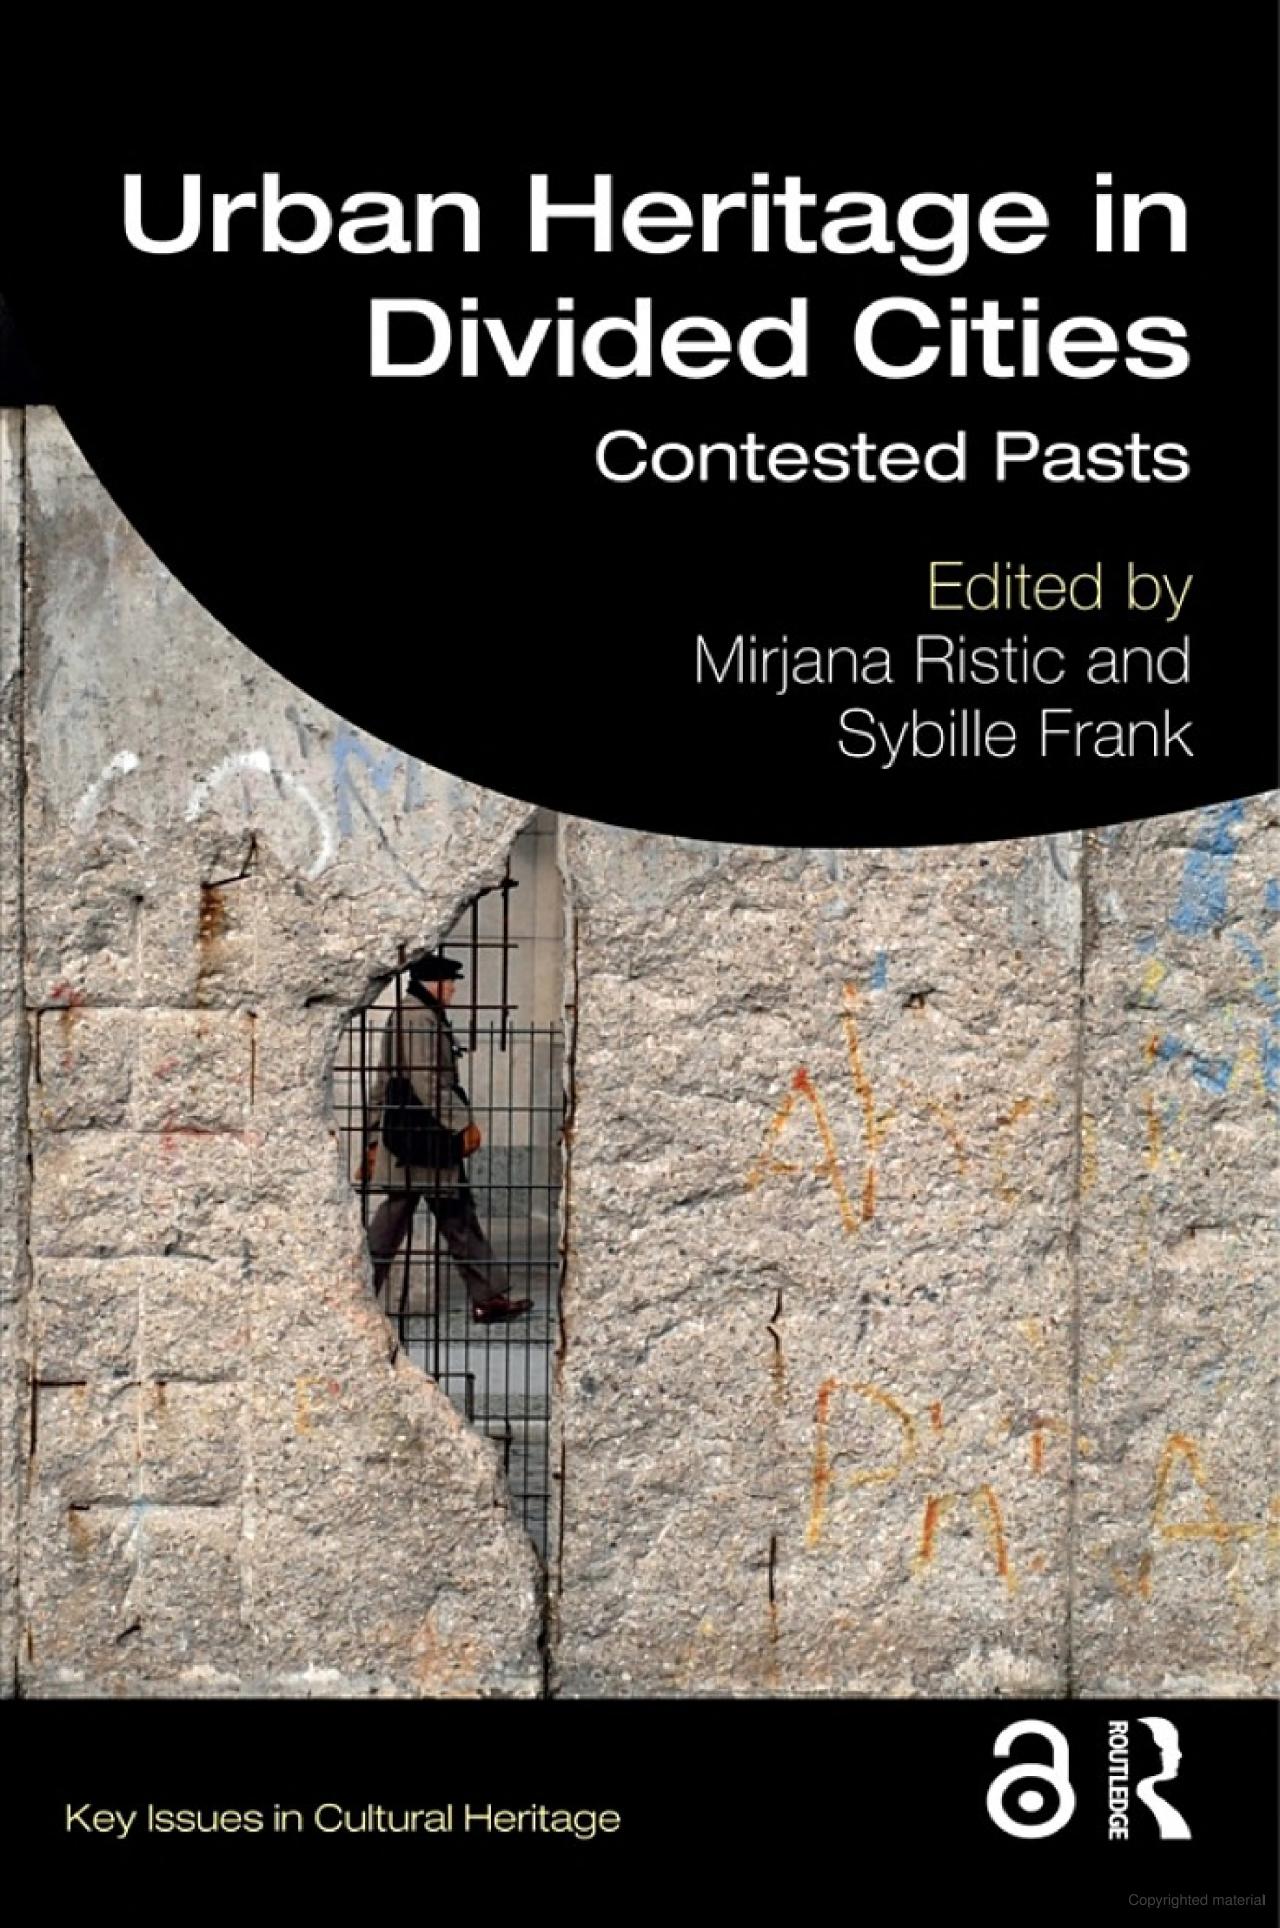 Urban heritage in divided cities contested pasts